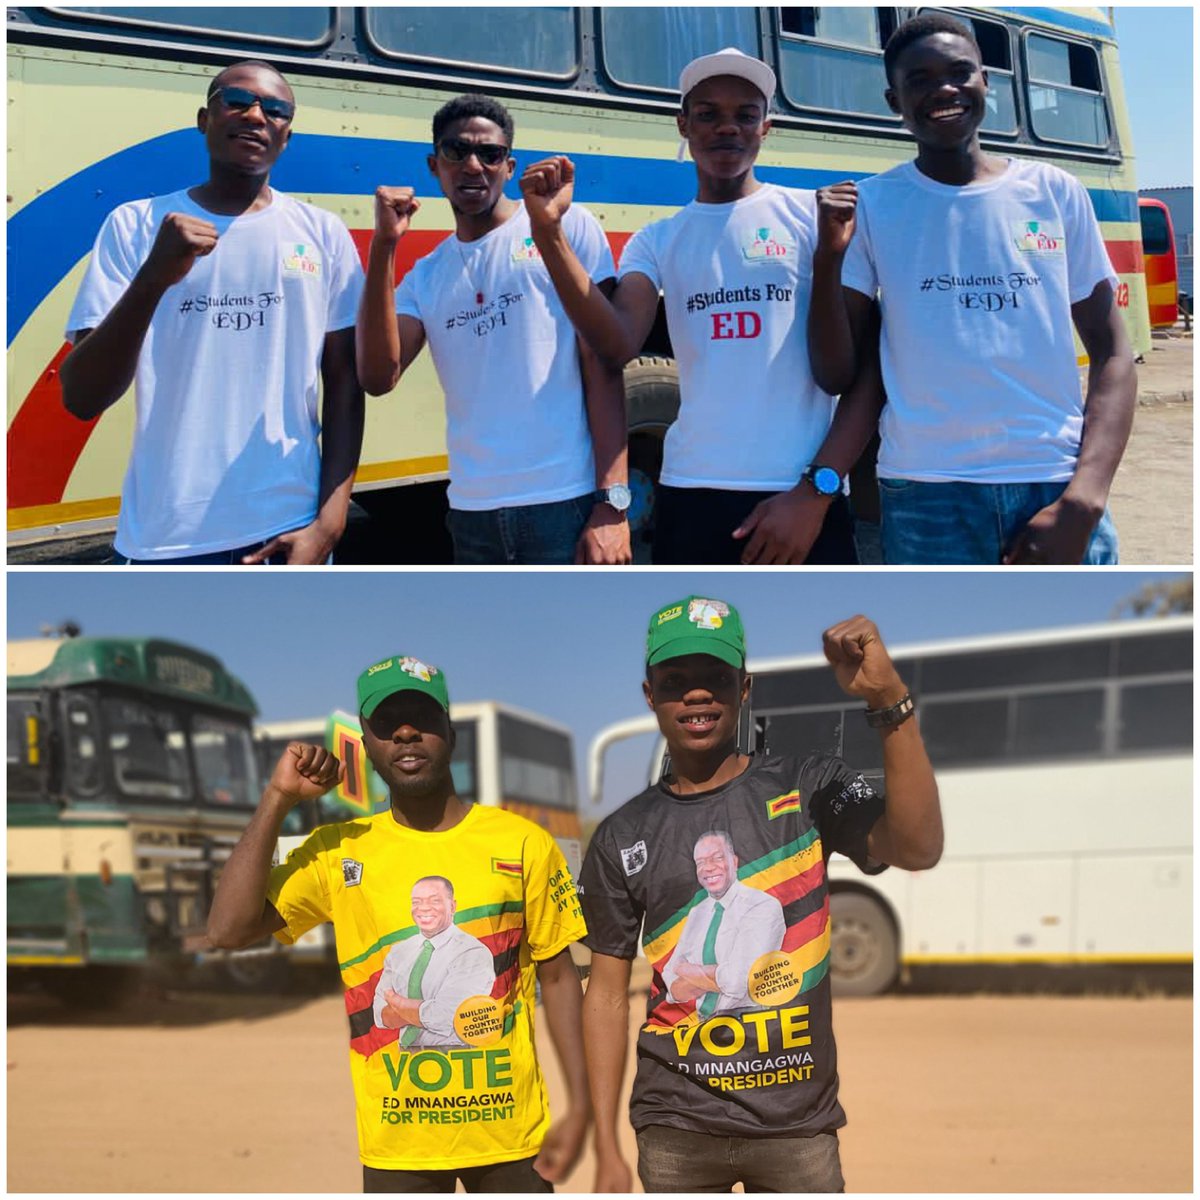 🇿🇼youths will cntinu to actively work in bringing positive change in🇿🇼. Gallant sons n daughters of the soil died so as to mk sure tht we are free & we choose to follow in those footsteps & we'll fyt a different battle, one of safeguarding the legacy & preserving our sovereignty.